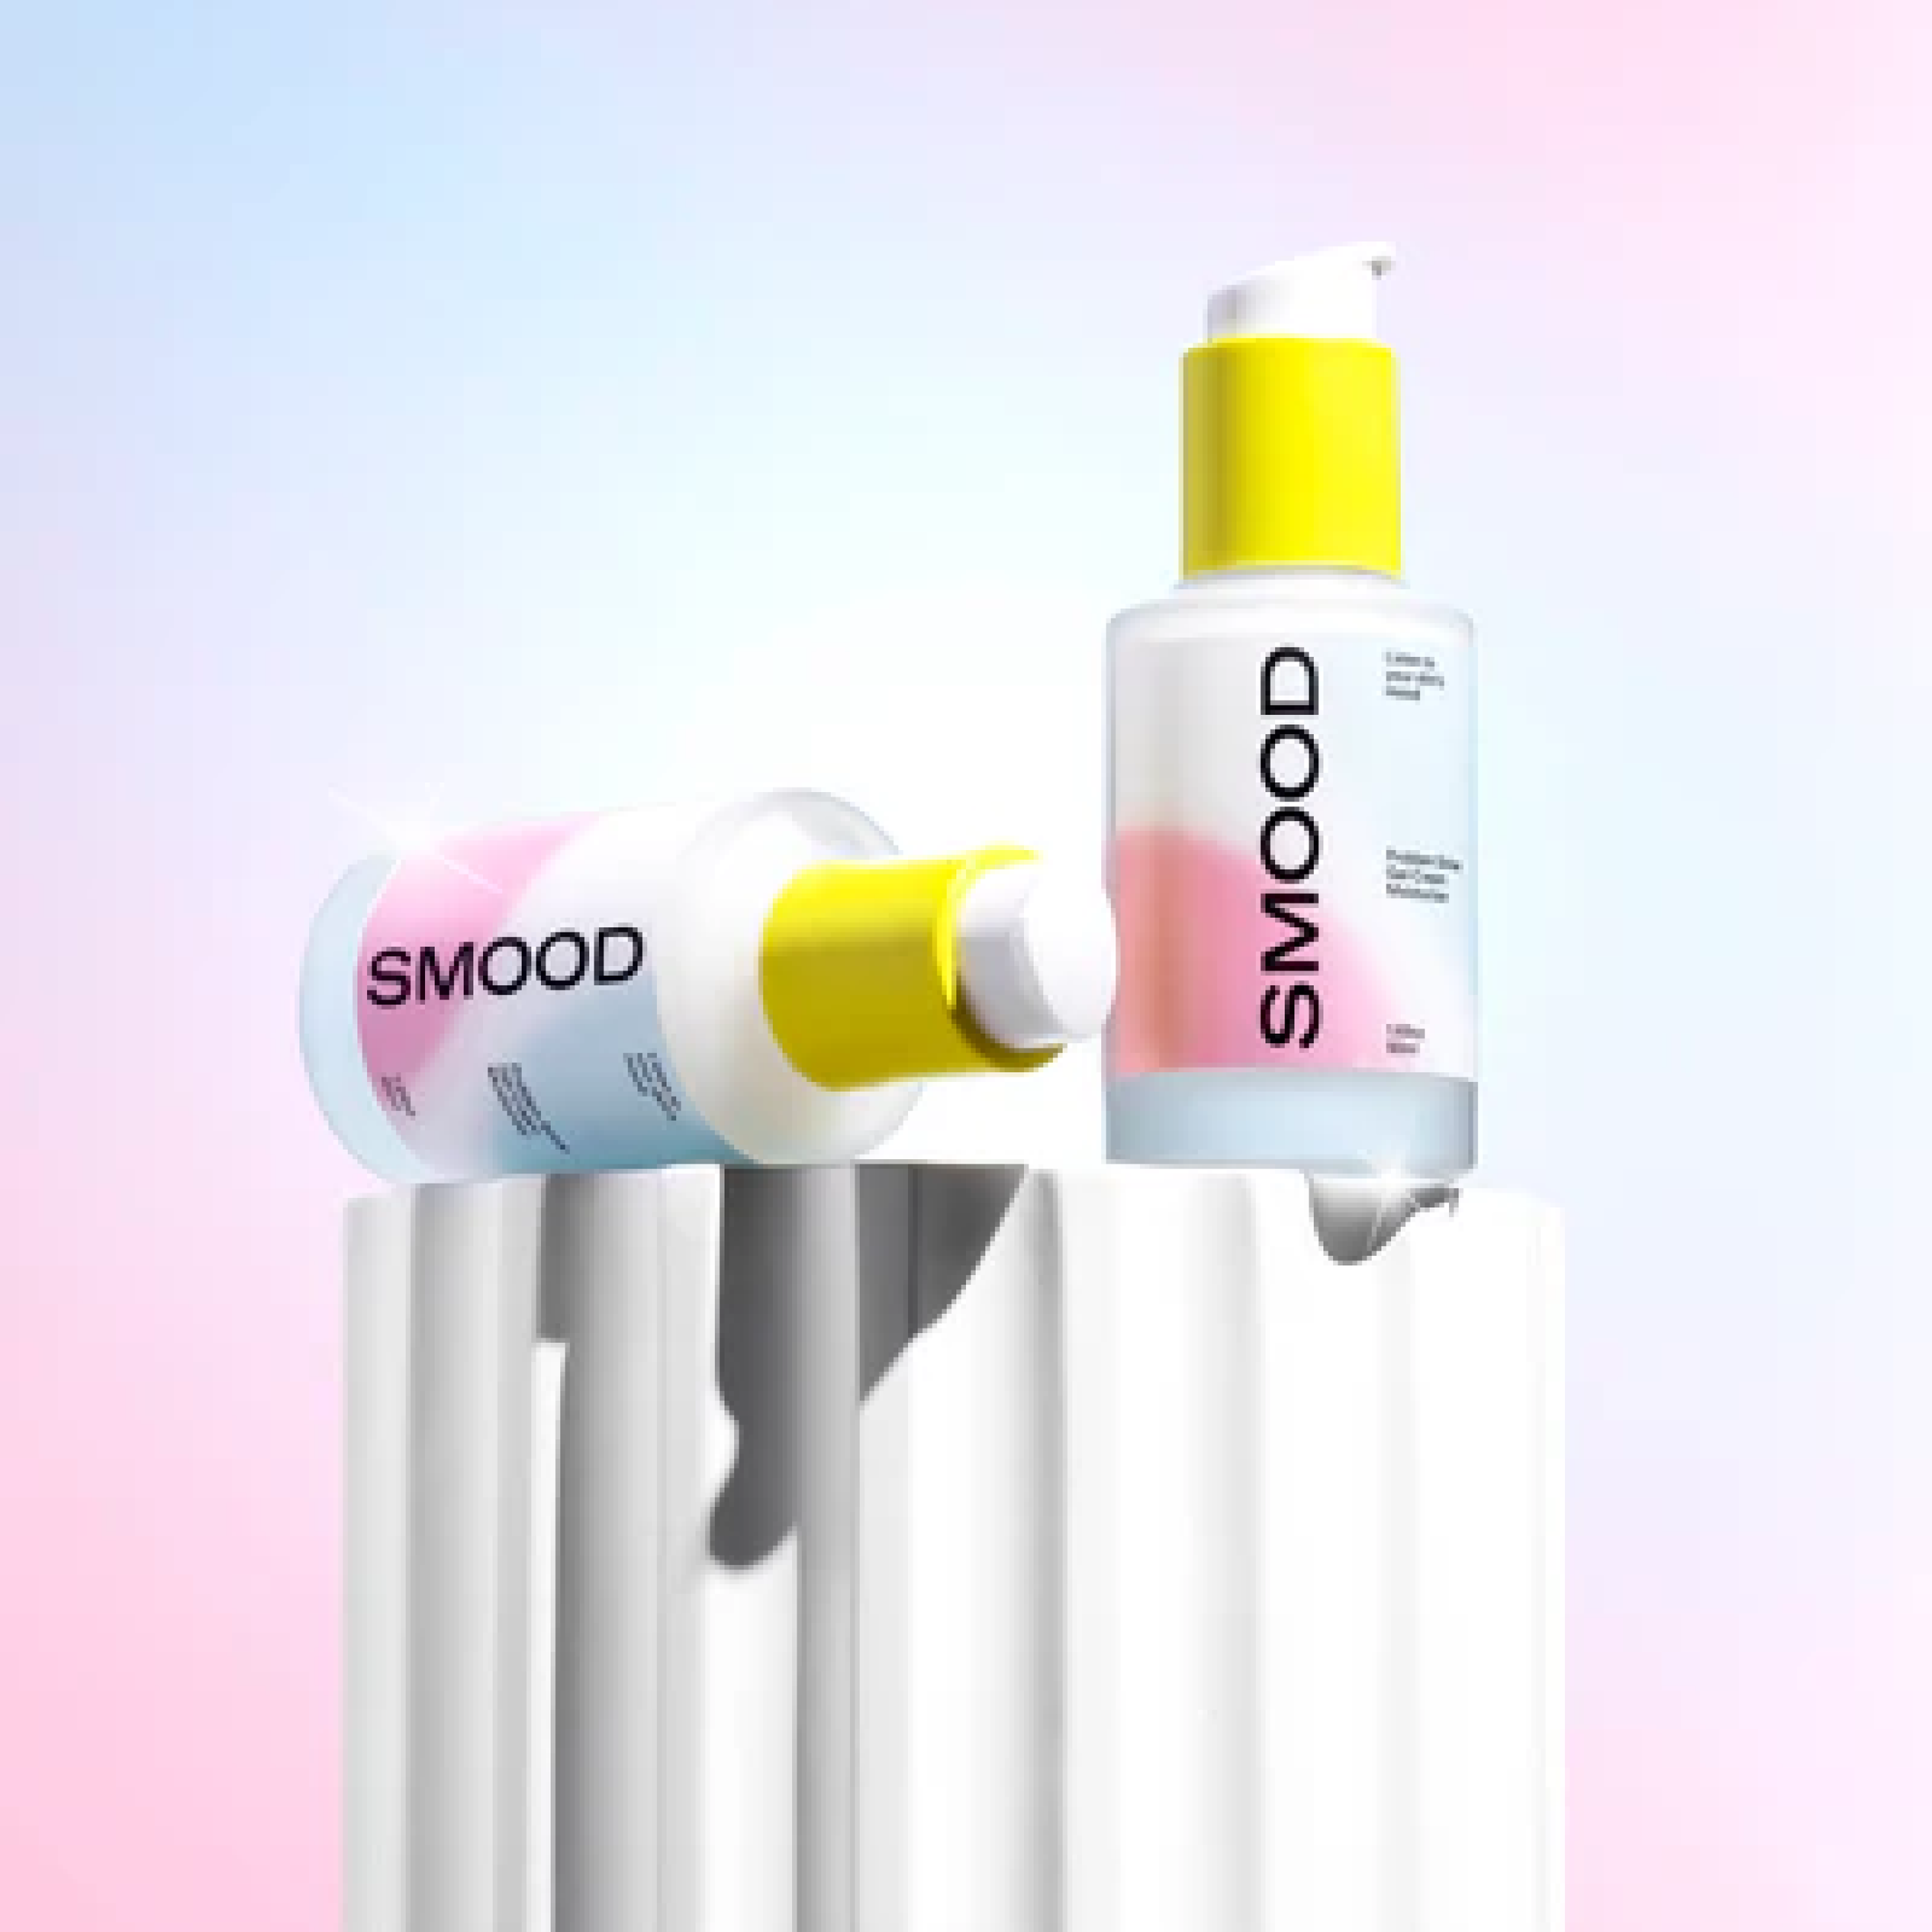 Smood-Product 2-Famm@2x.png